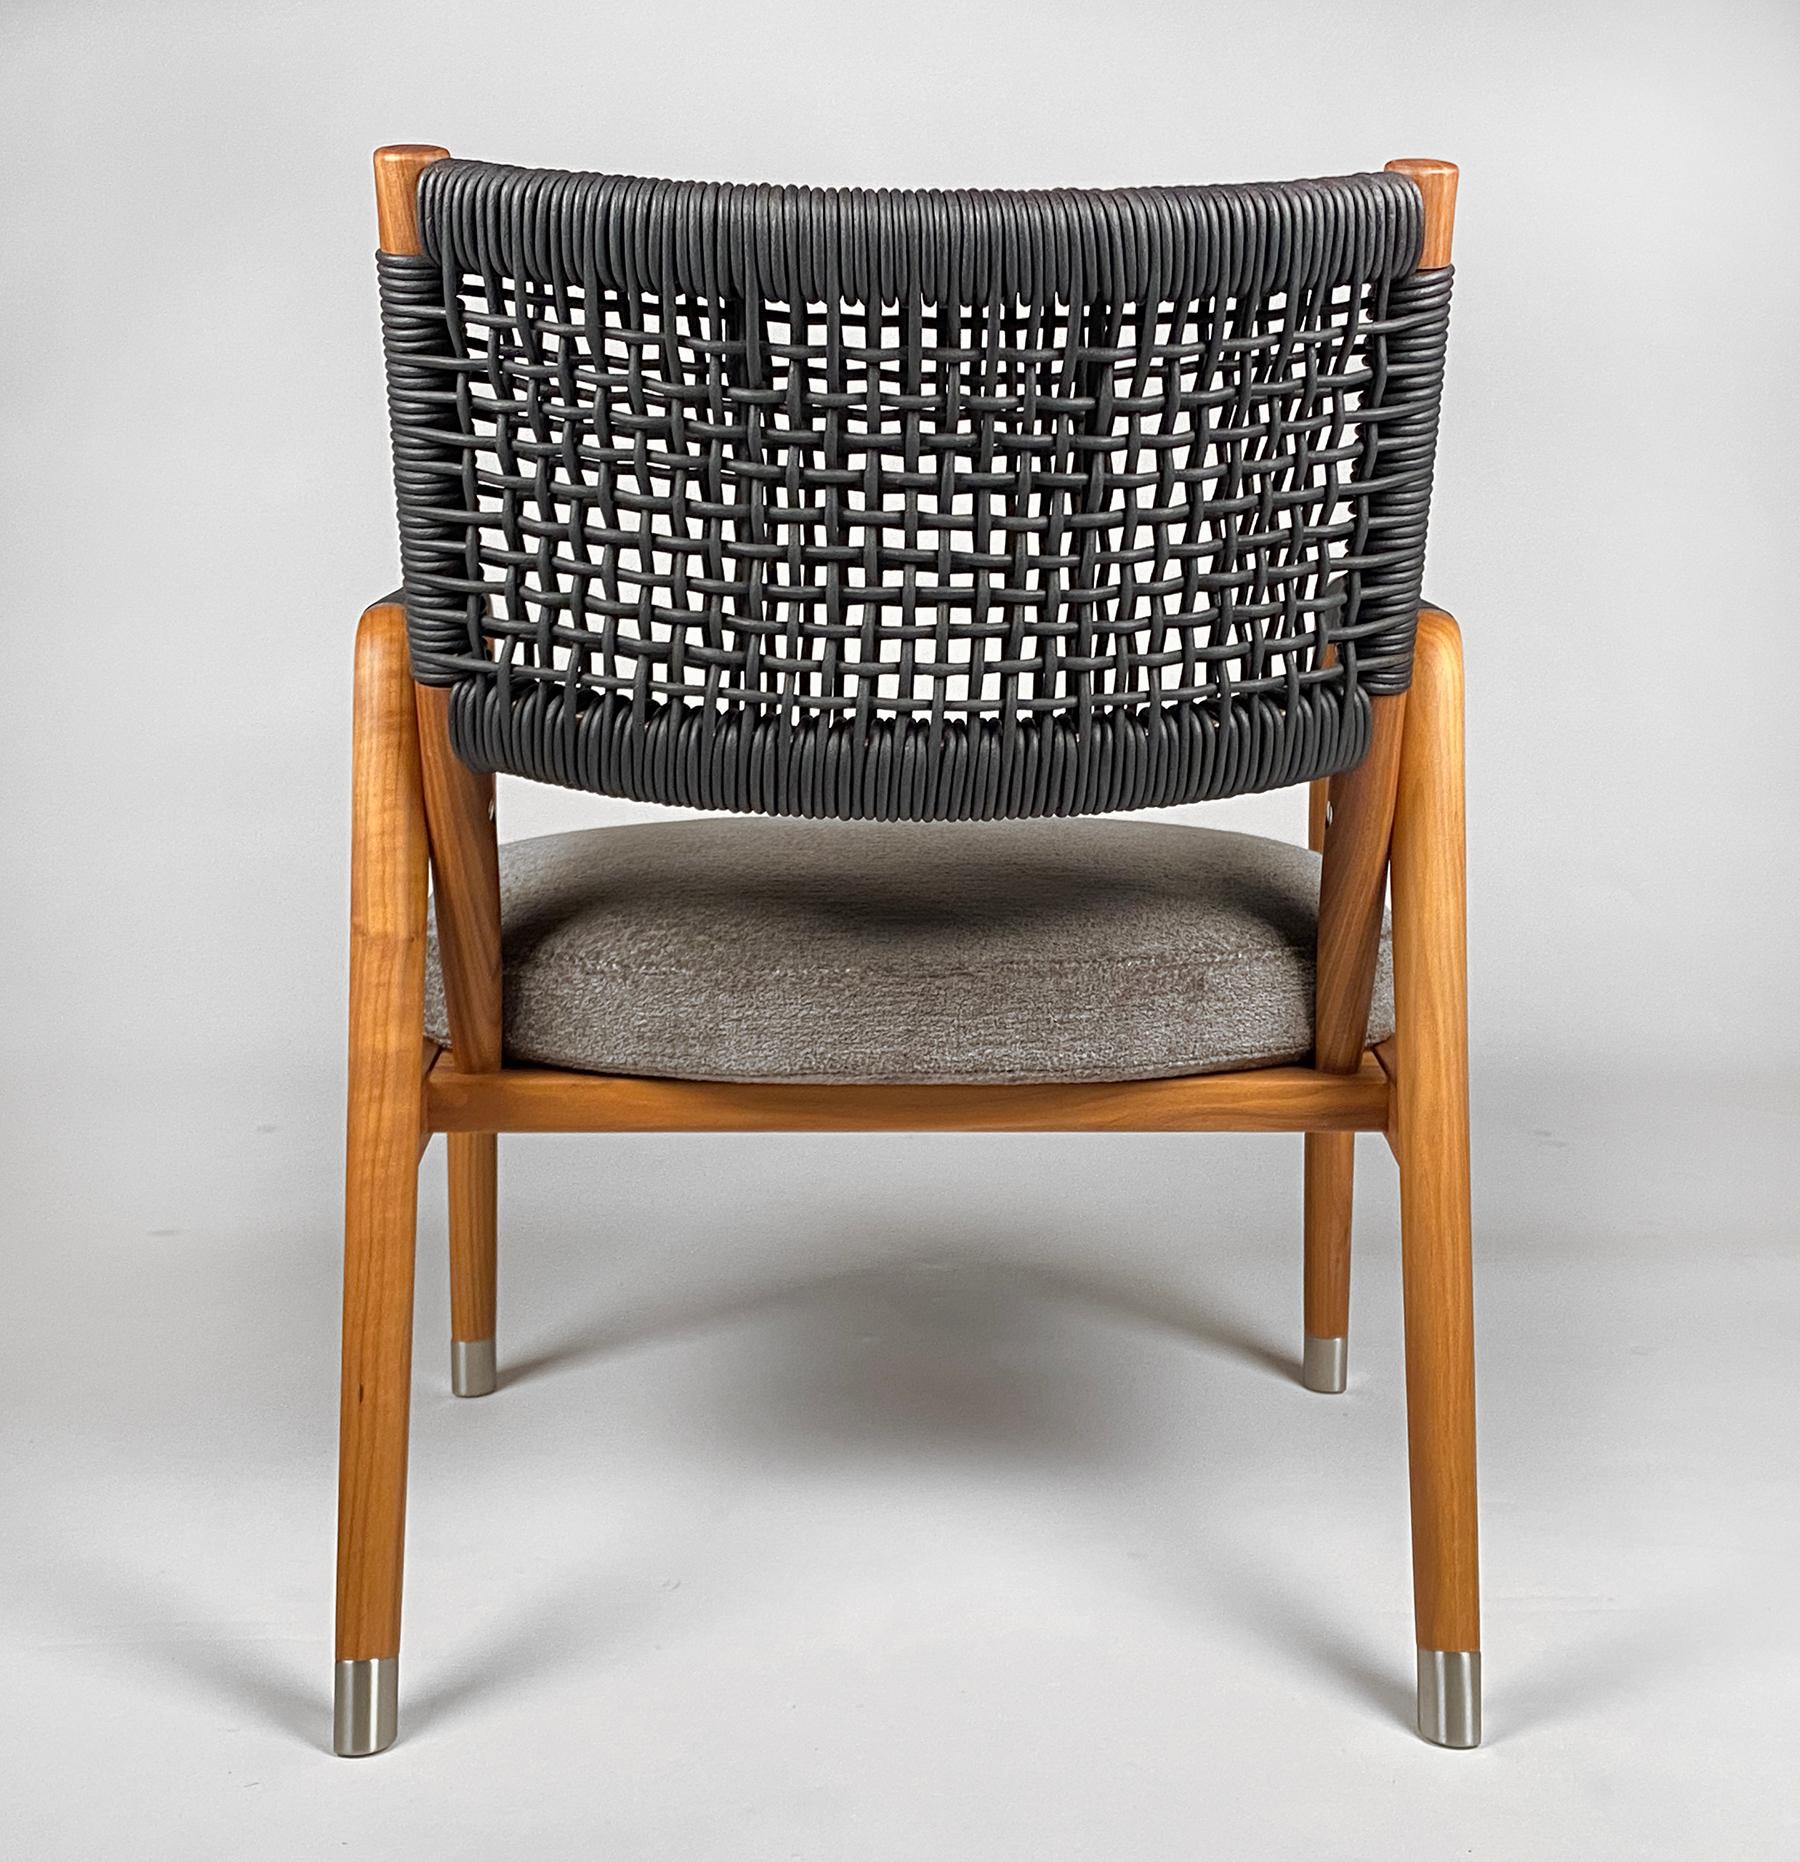 Modern Flexform Ortigia Armchairs in Hand-Woven Black Leather Cord over Solid Walnut For Sale